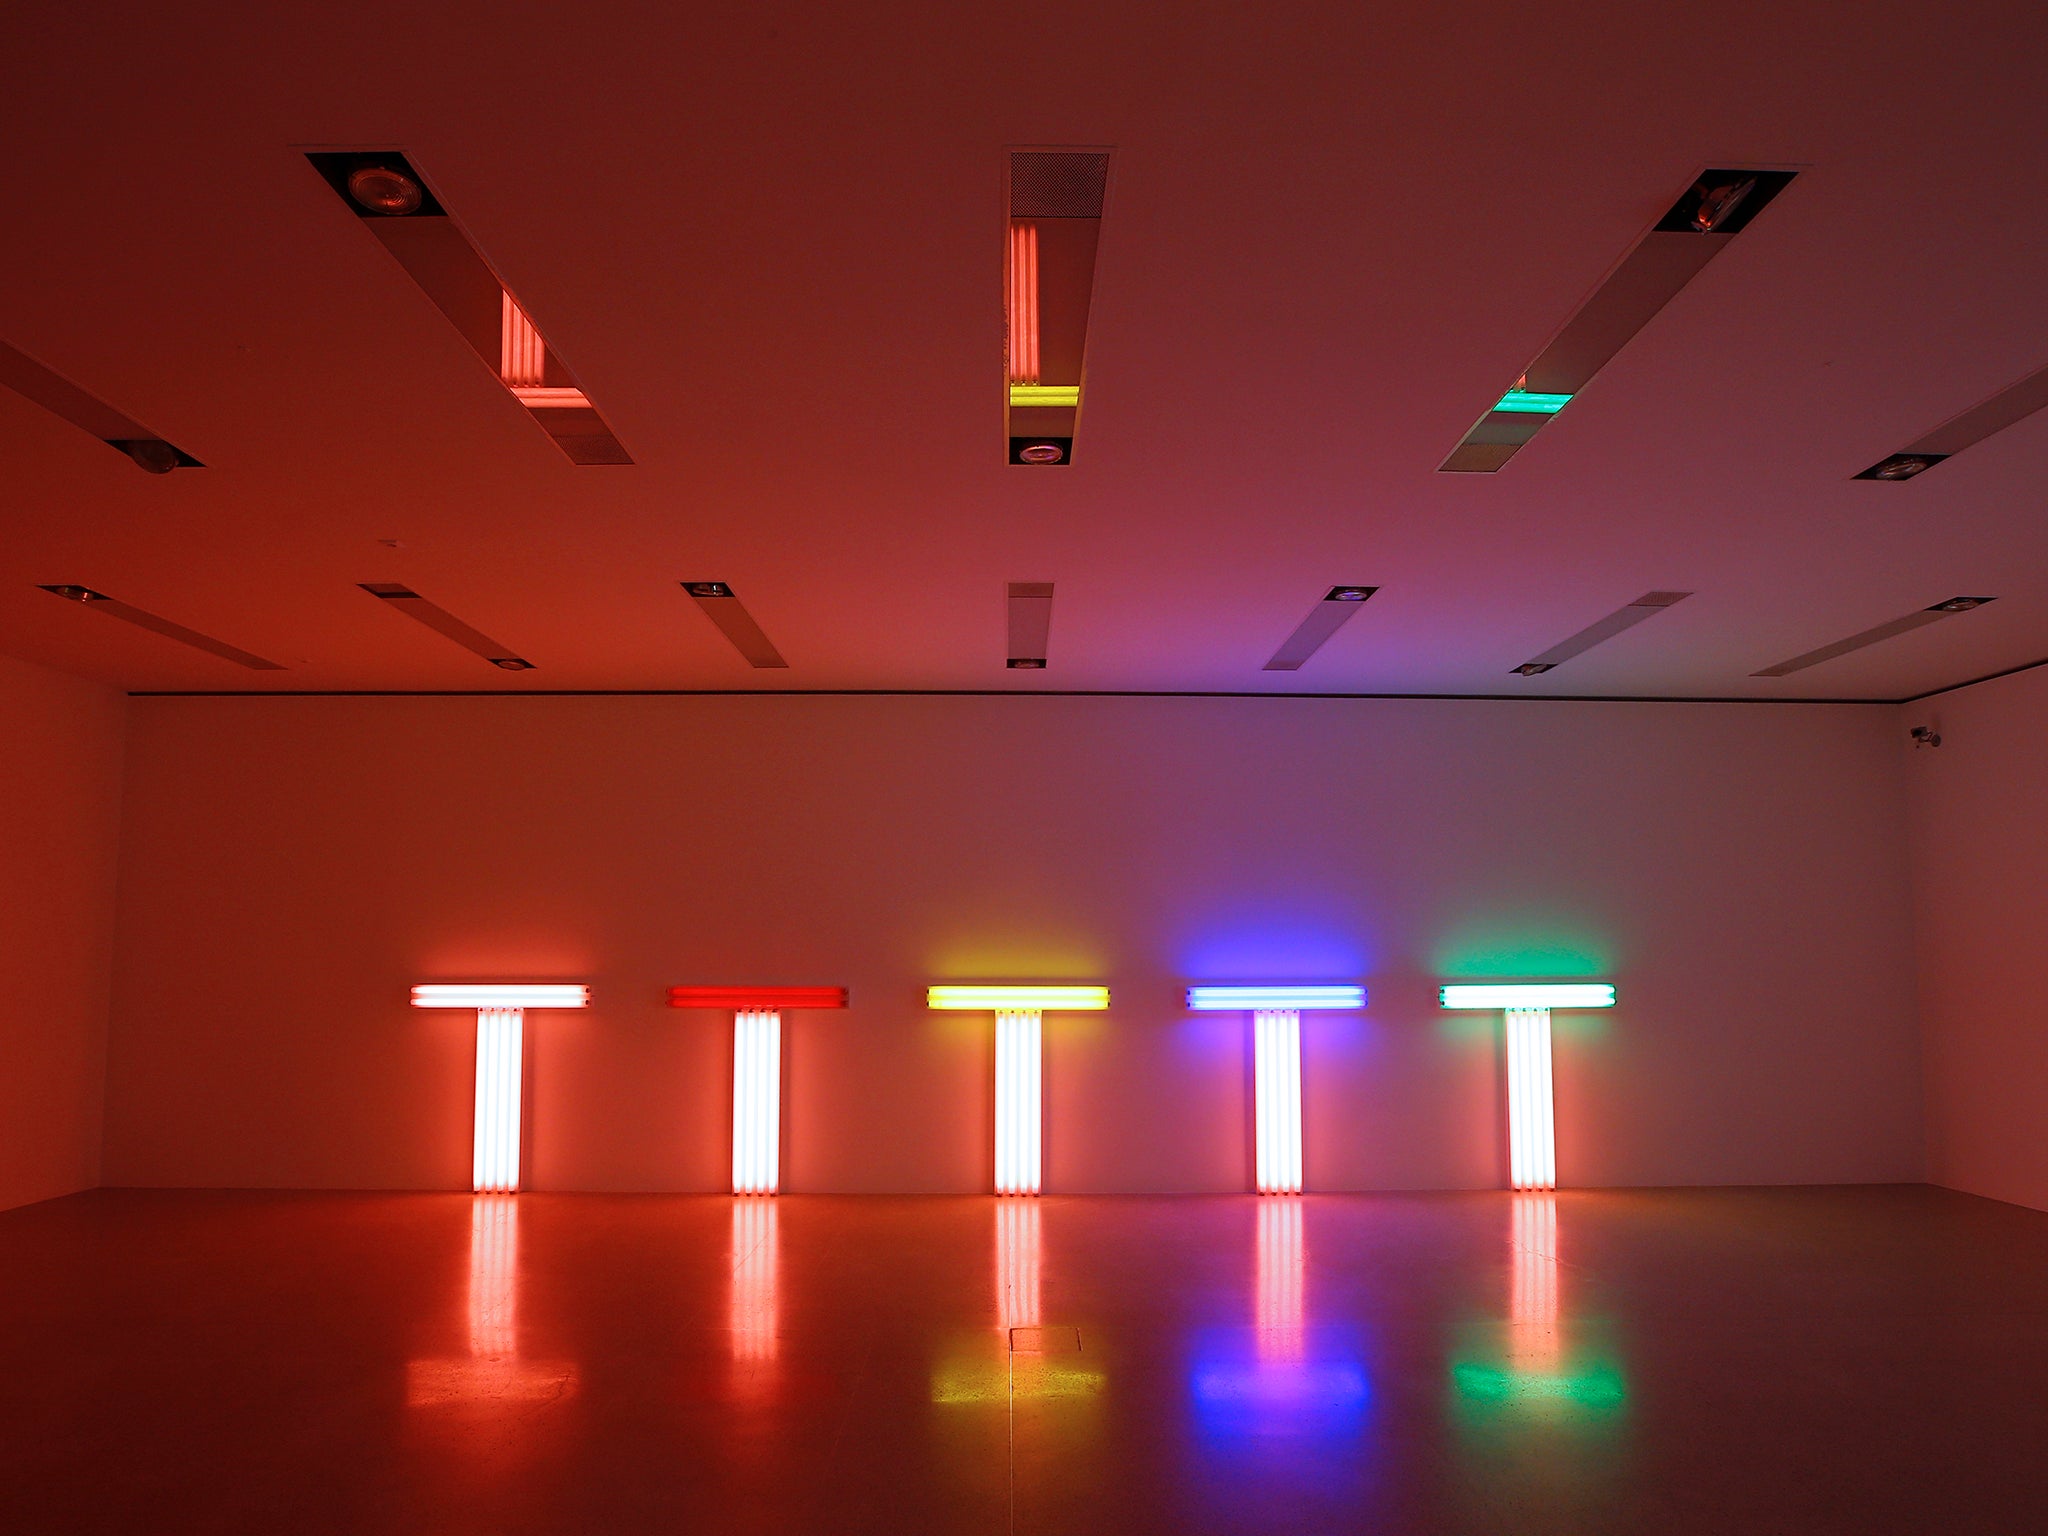 Artists in Zwirner’s fold include Dan Flavin, whose is known for his florescent tube artworks